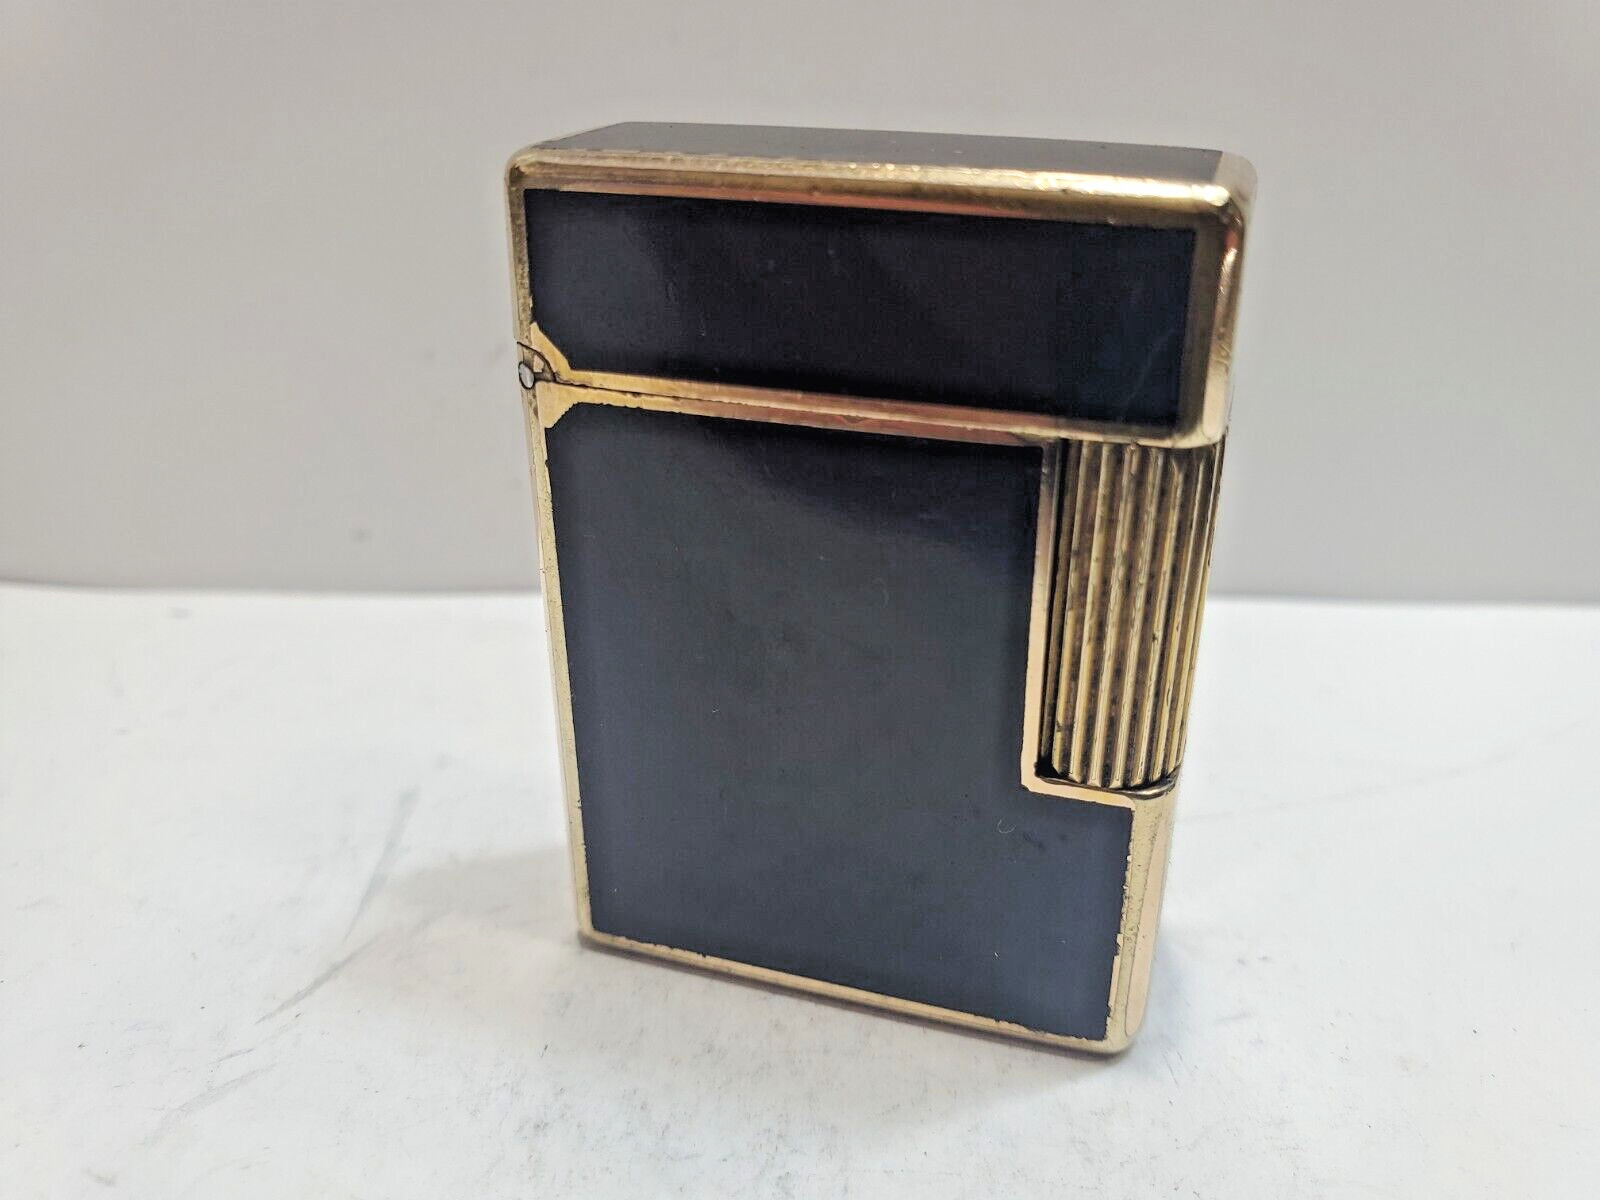 Working Vintage S.T. Dupont Black Chinese Lacquer Petrol Lighter - RARE 6762/37